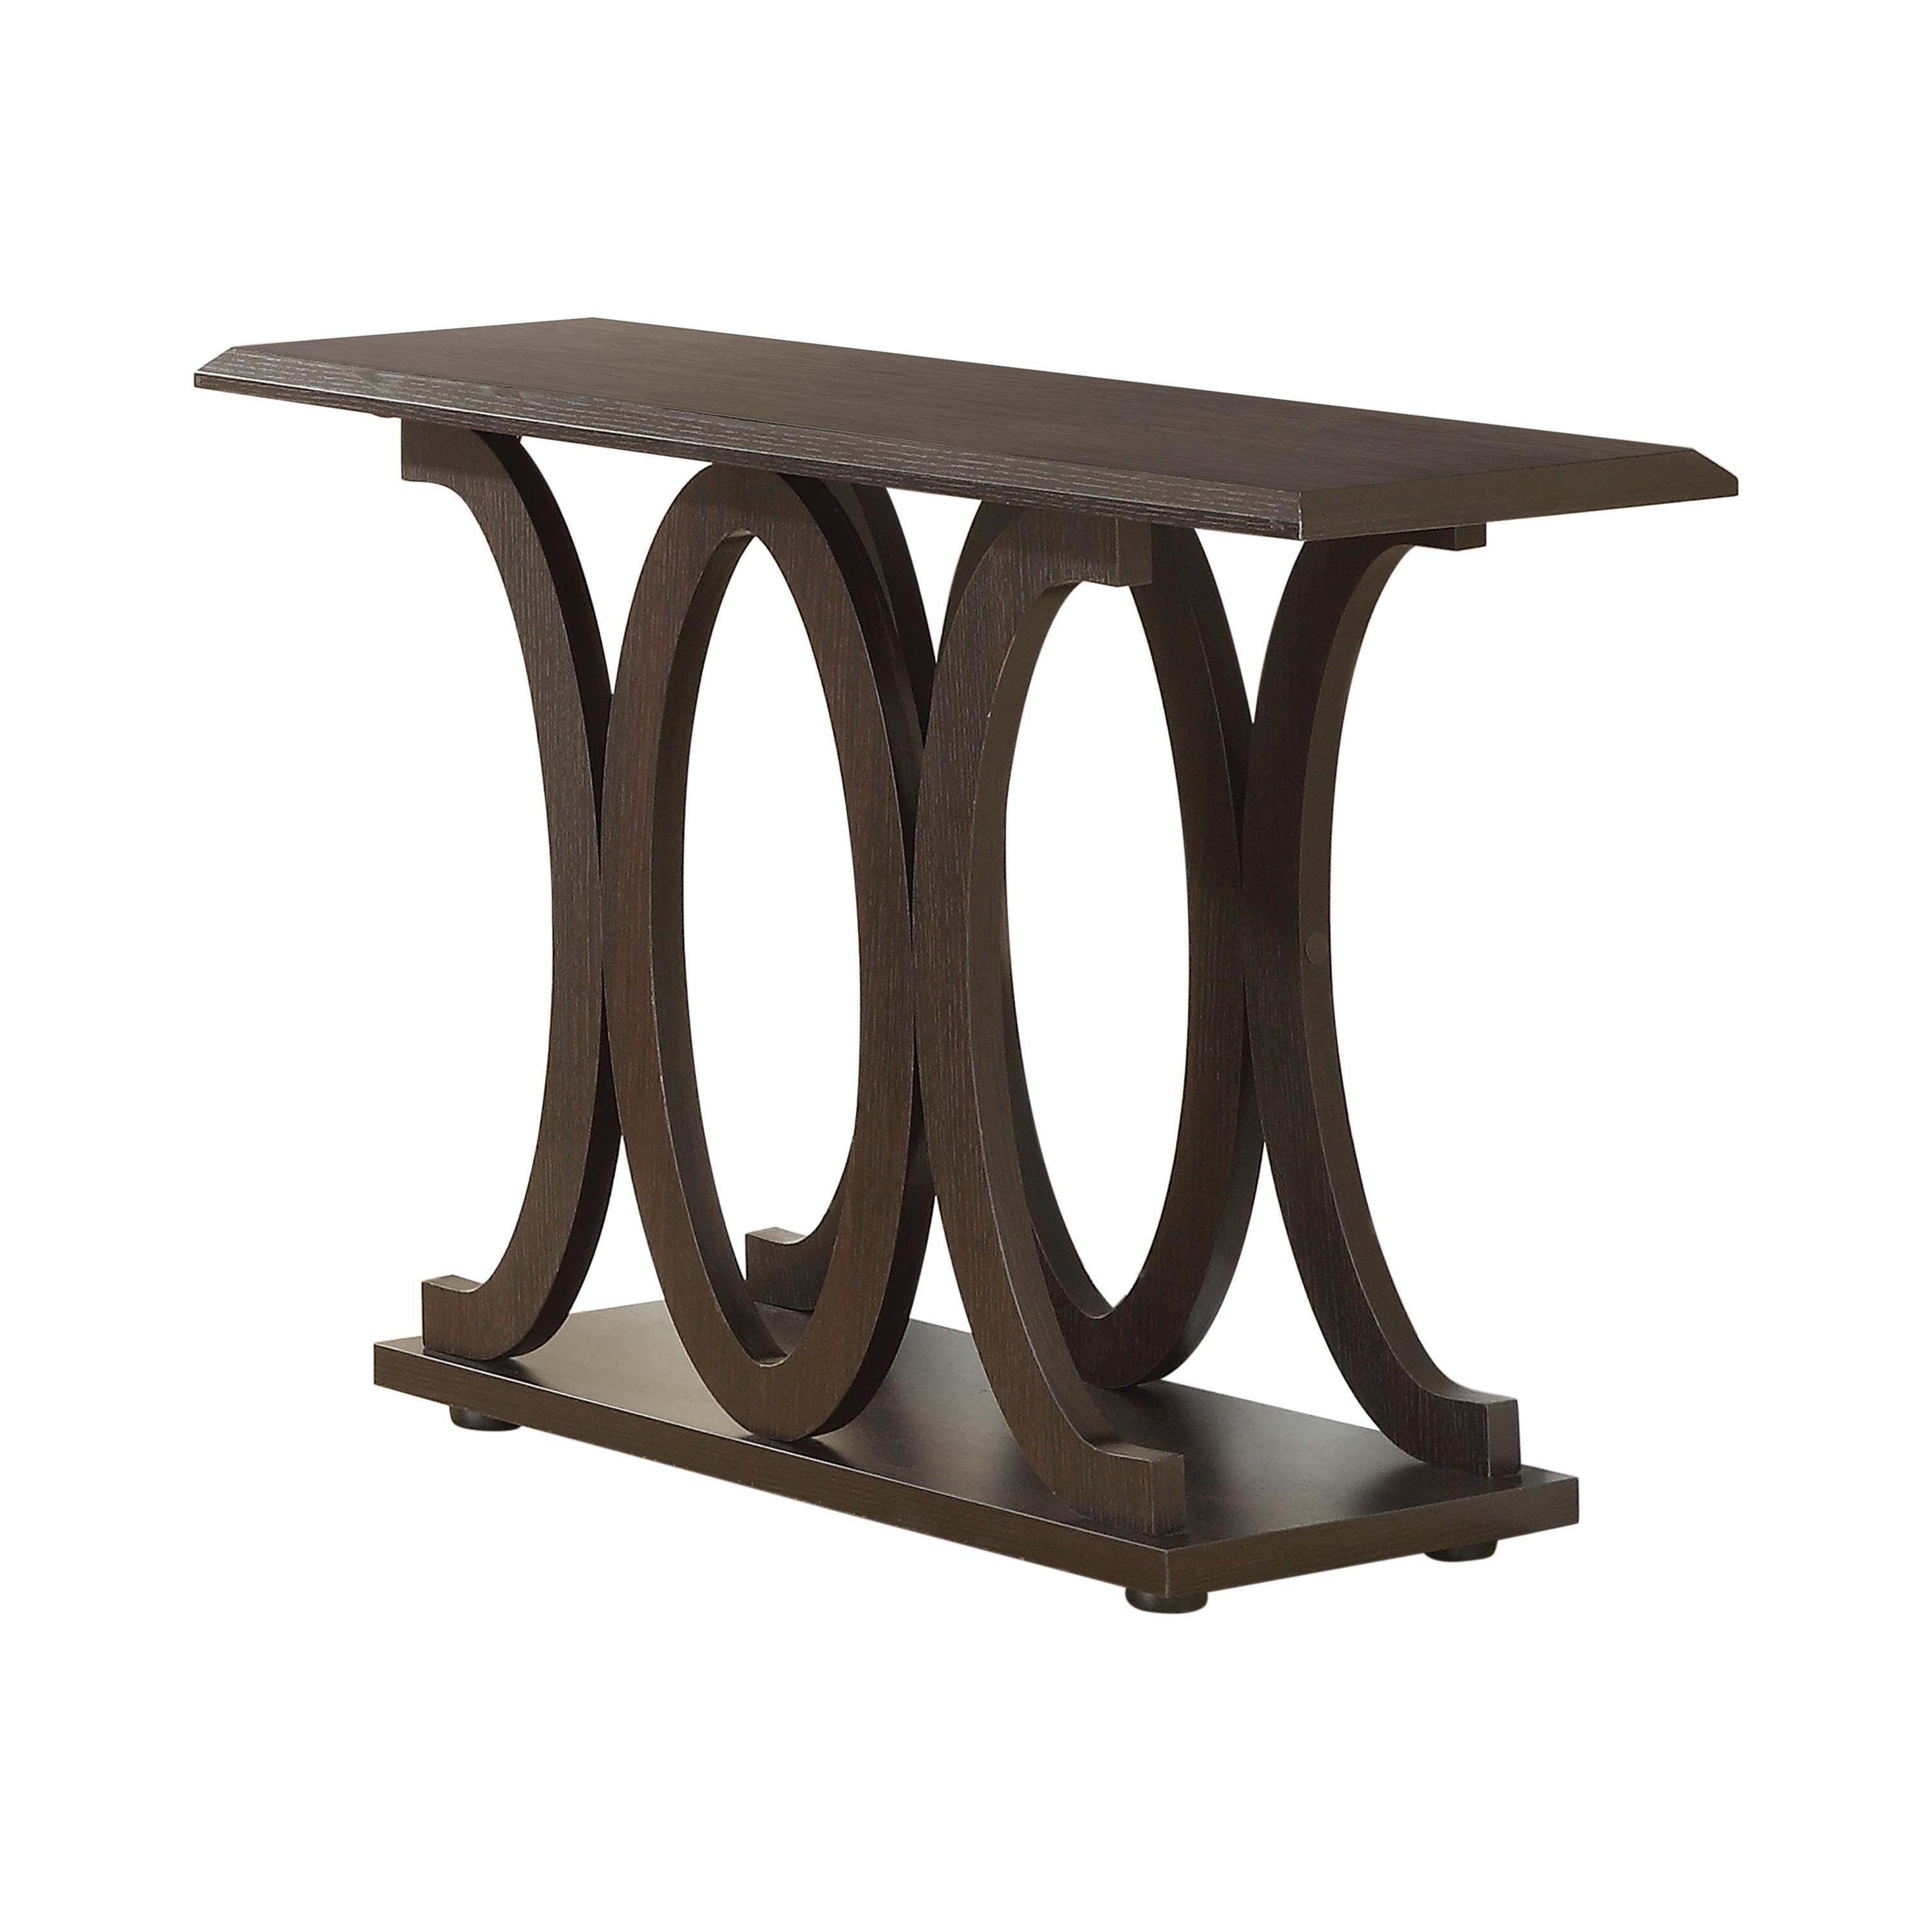 Transitional Sofa Table 703149 703149 in Cappuccino 